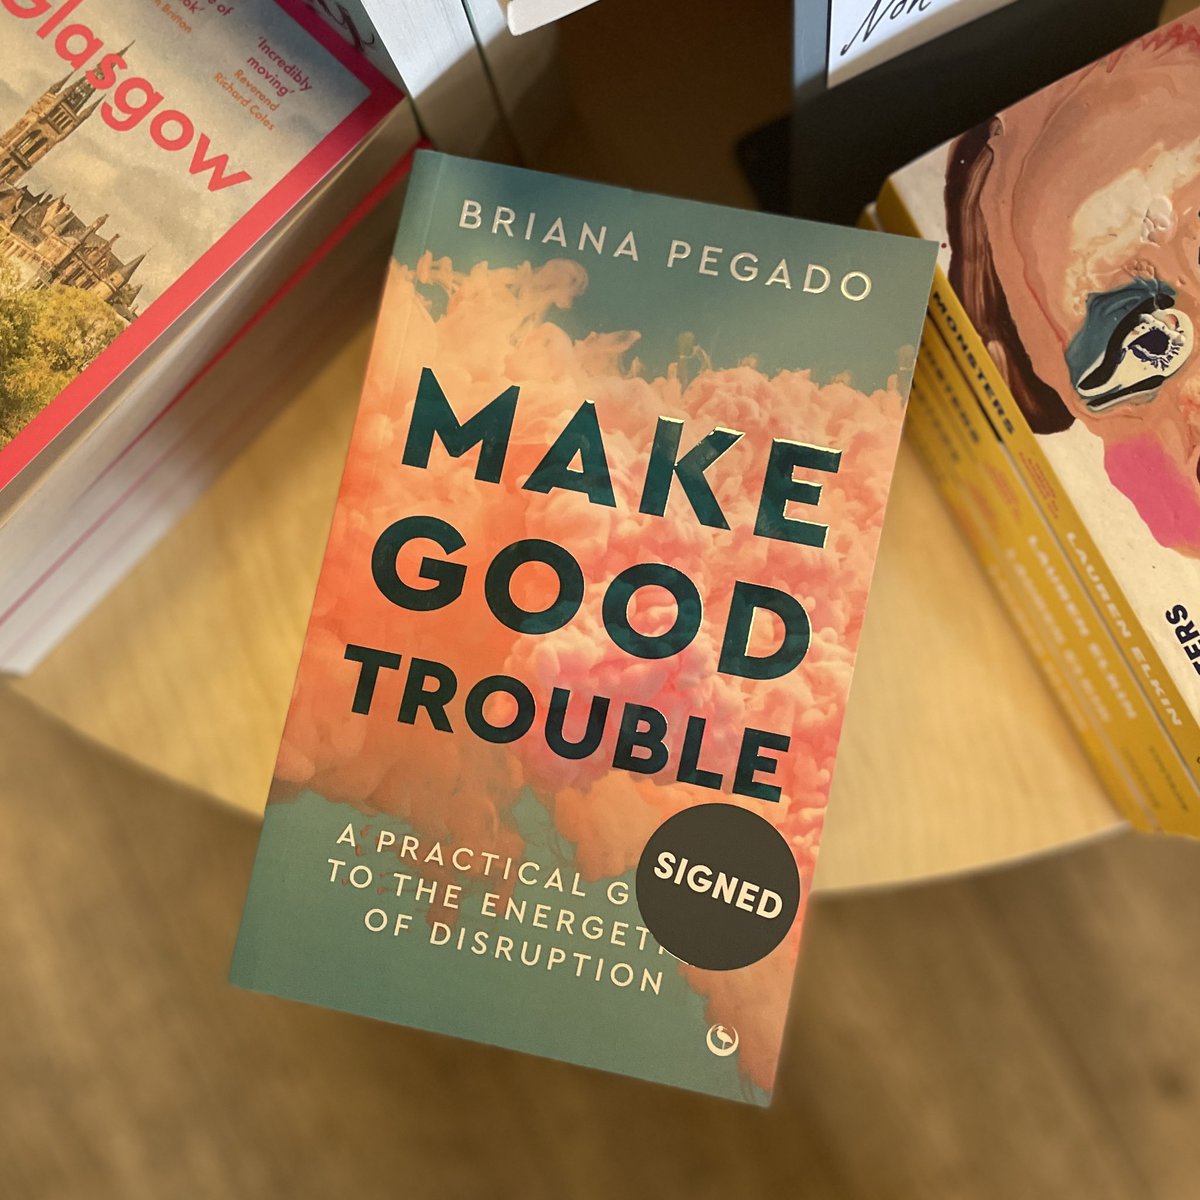 @alisonmurray360 @HachetteKids More Signed Editions of Make Good Trouble have landed in the bookshop! Thank you @briana_pegado for popping in to ensure we are well stocked for the weekend! 💫 Find in the bookshop or here: theportobellobookshop.com/9781786787873-…